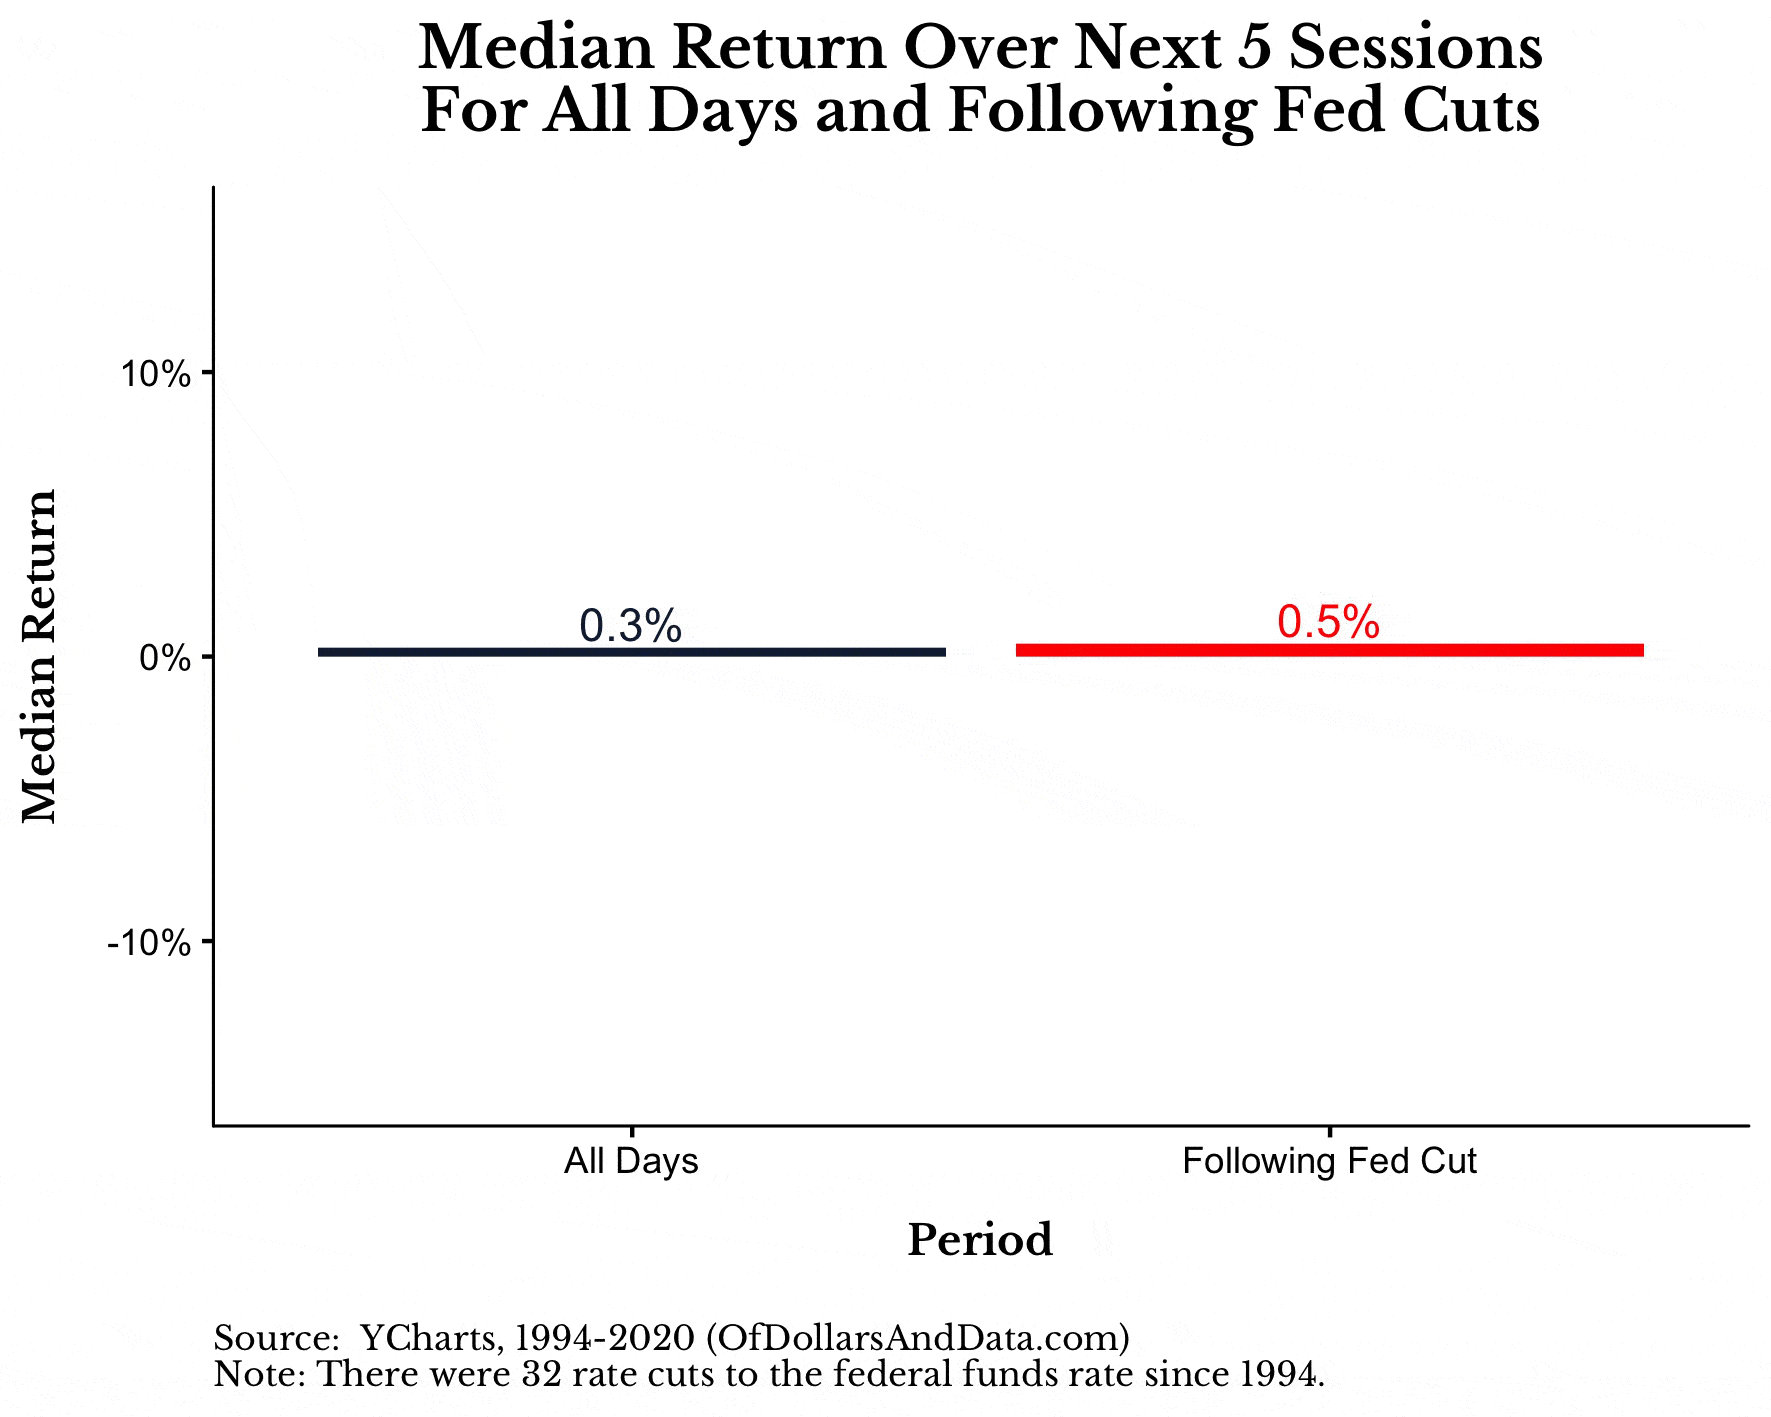 Median S&P 500 return over various number of sessions following rate cuts